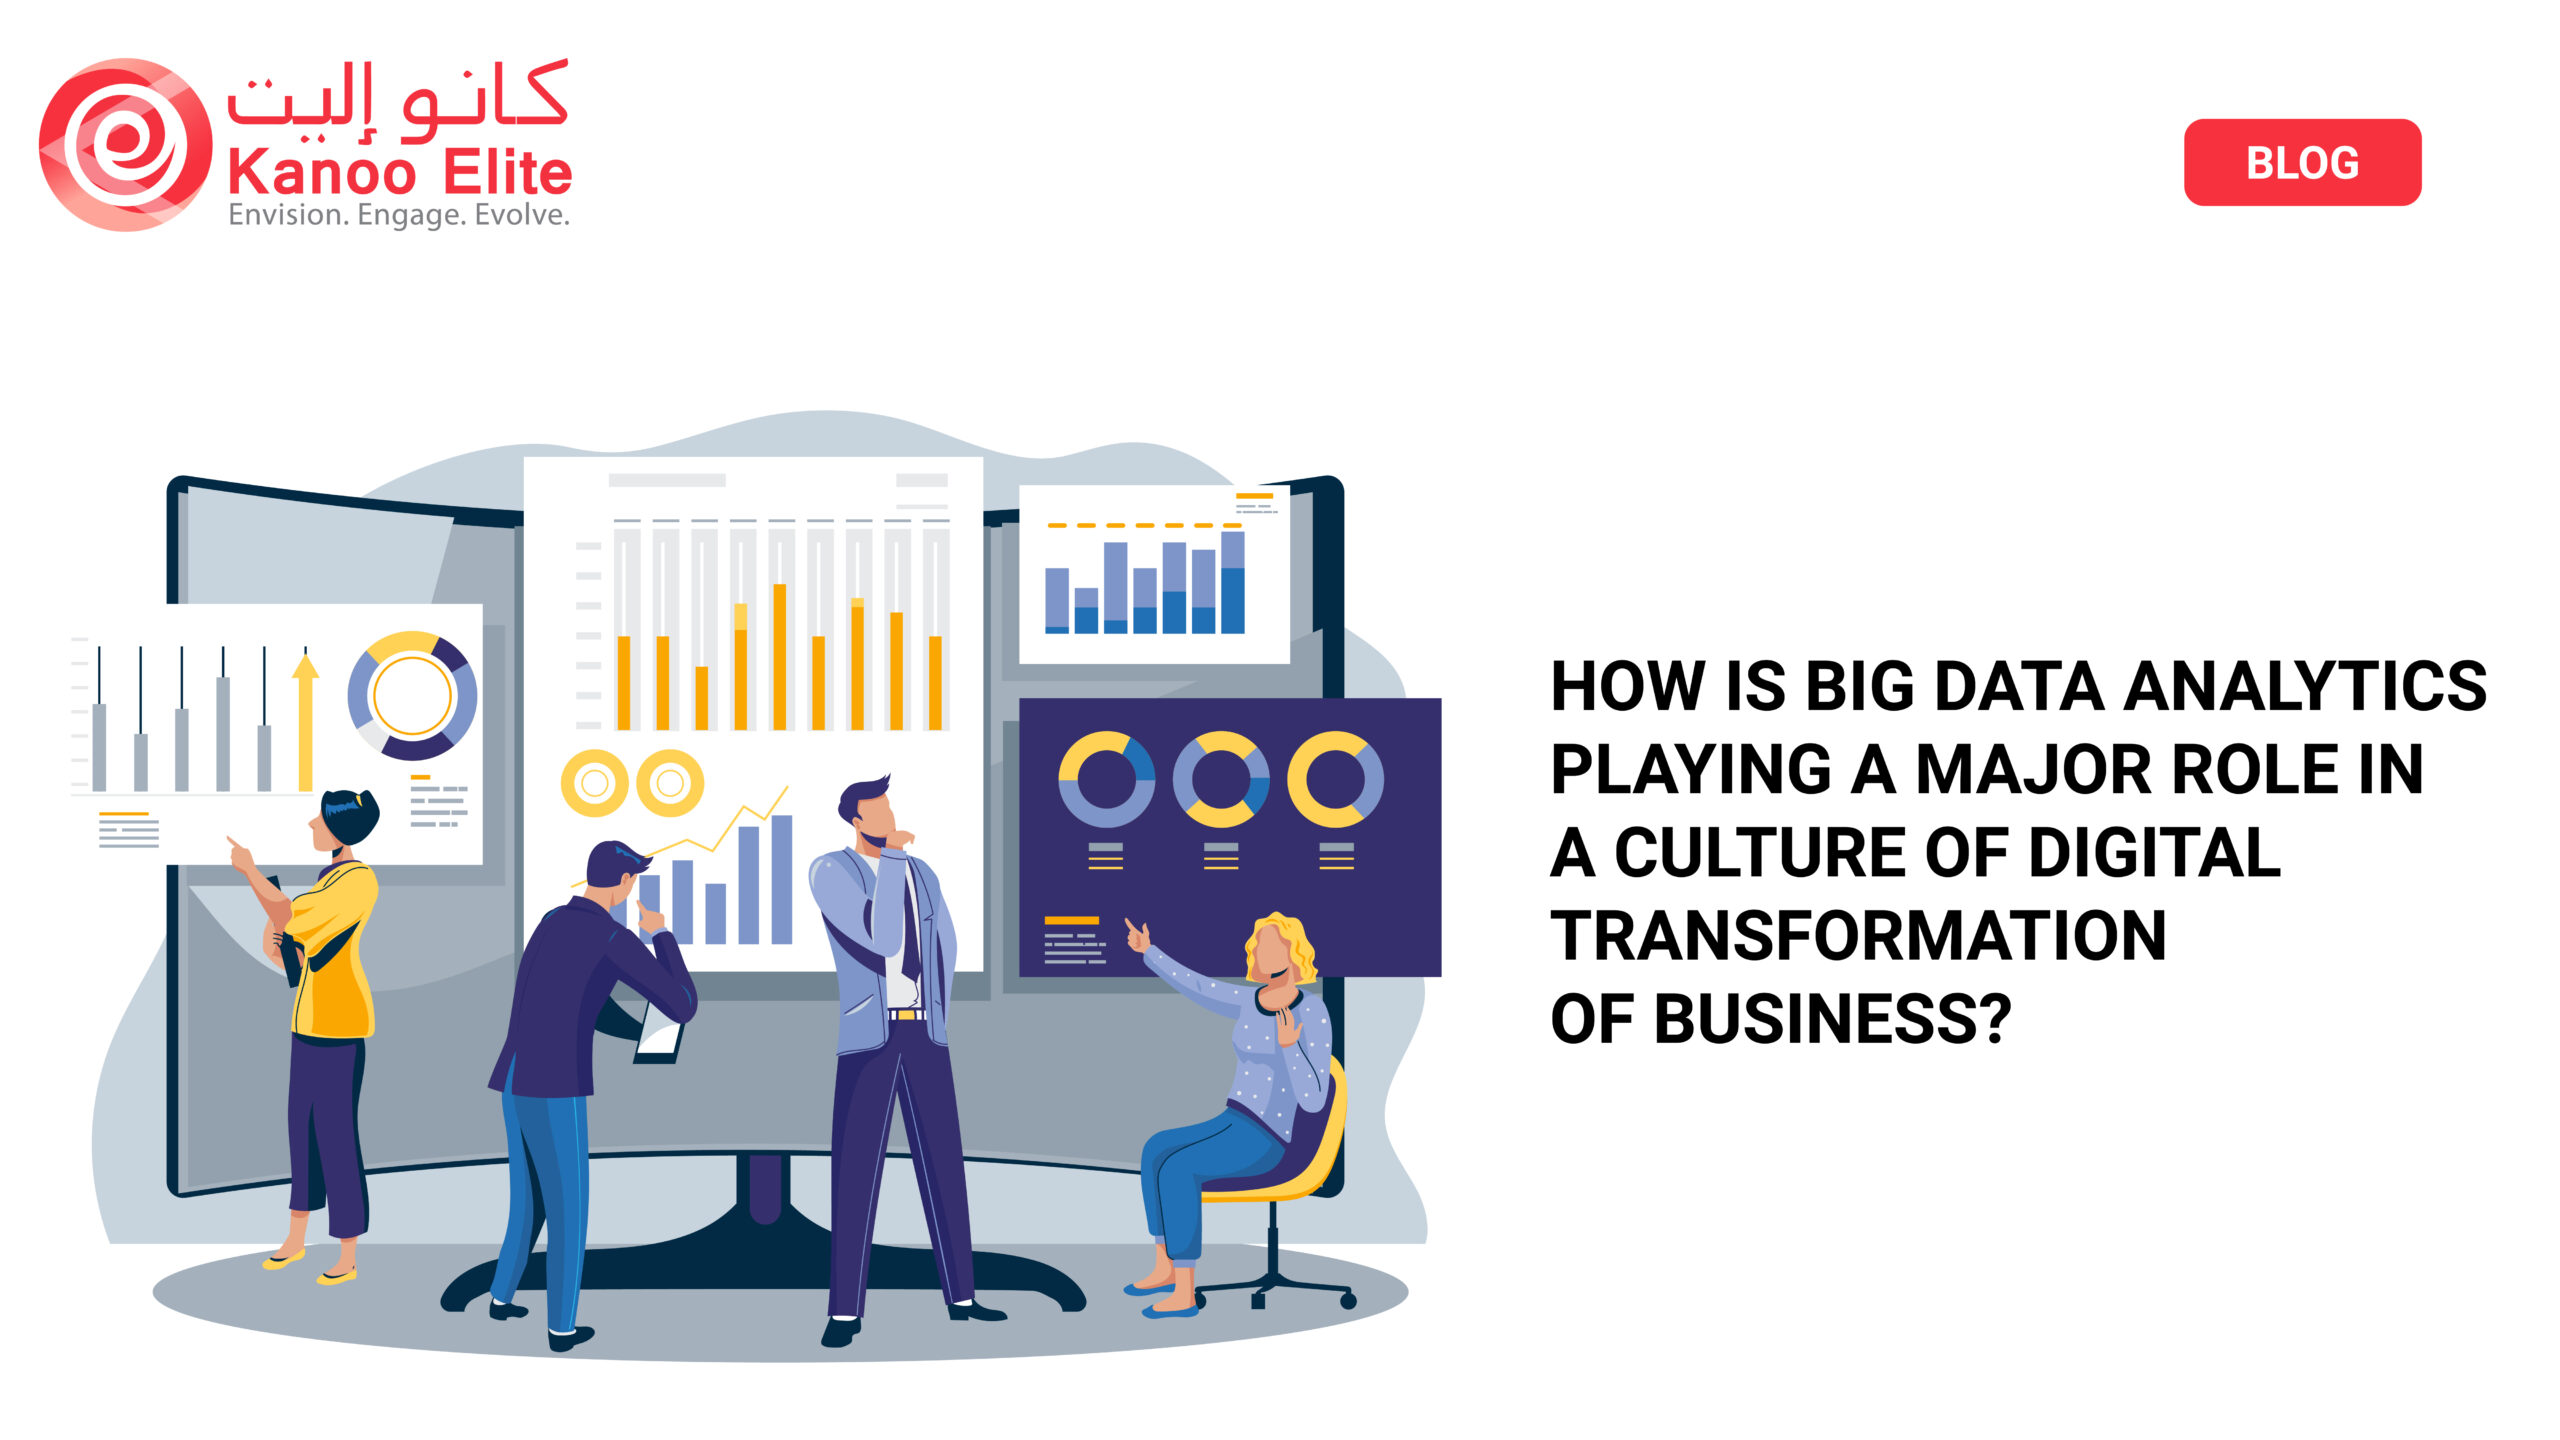 How is Big Data Analytics Playing a Major Role in a Culture of Digital Transformation of Business?